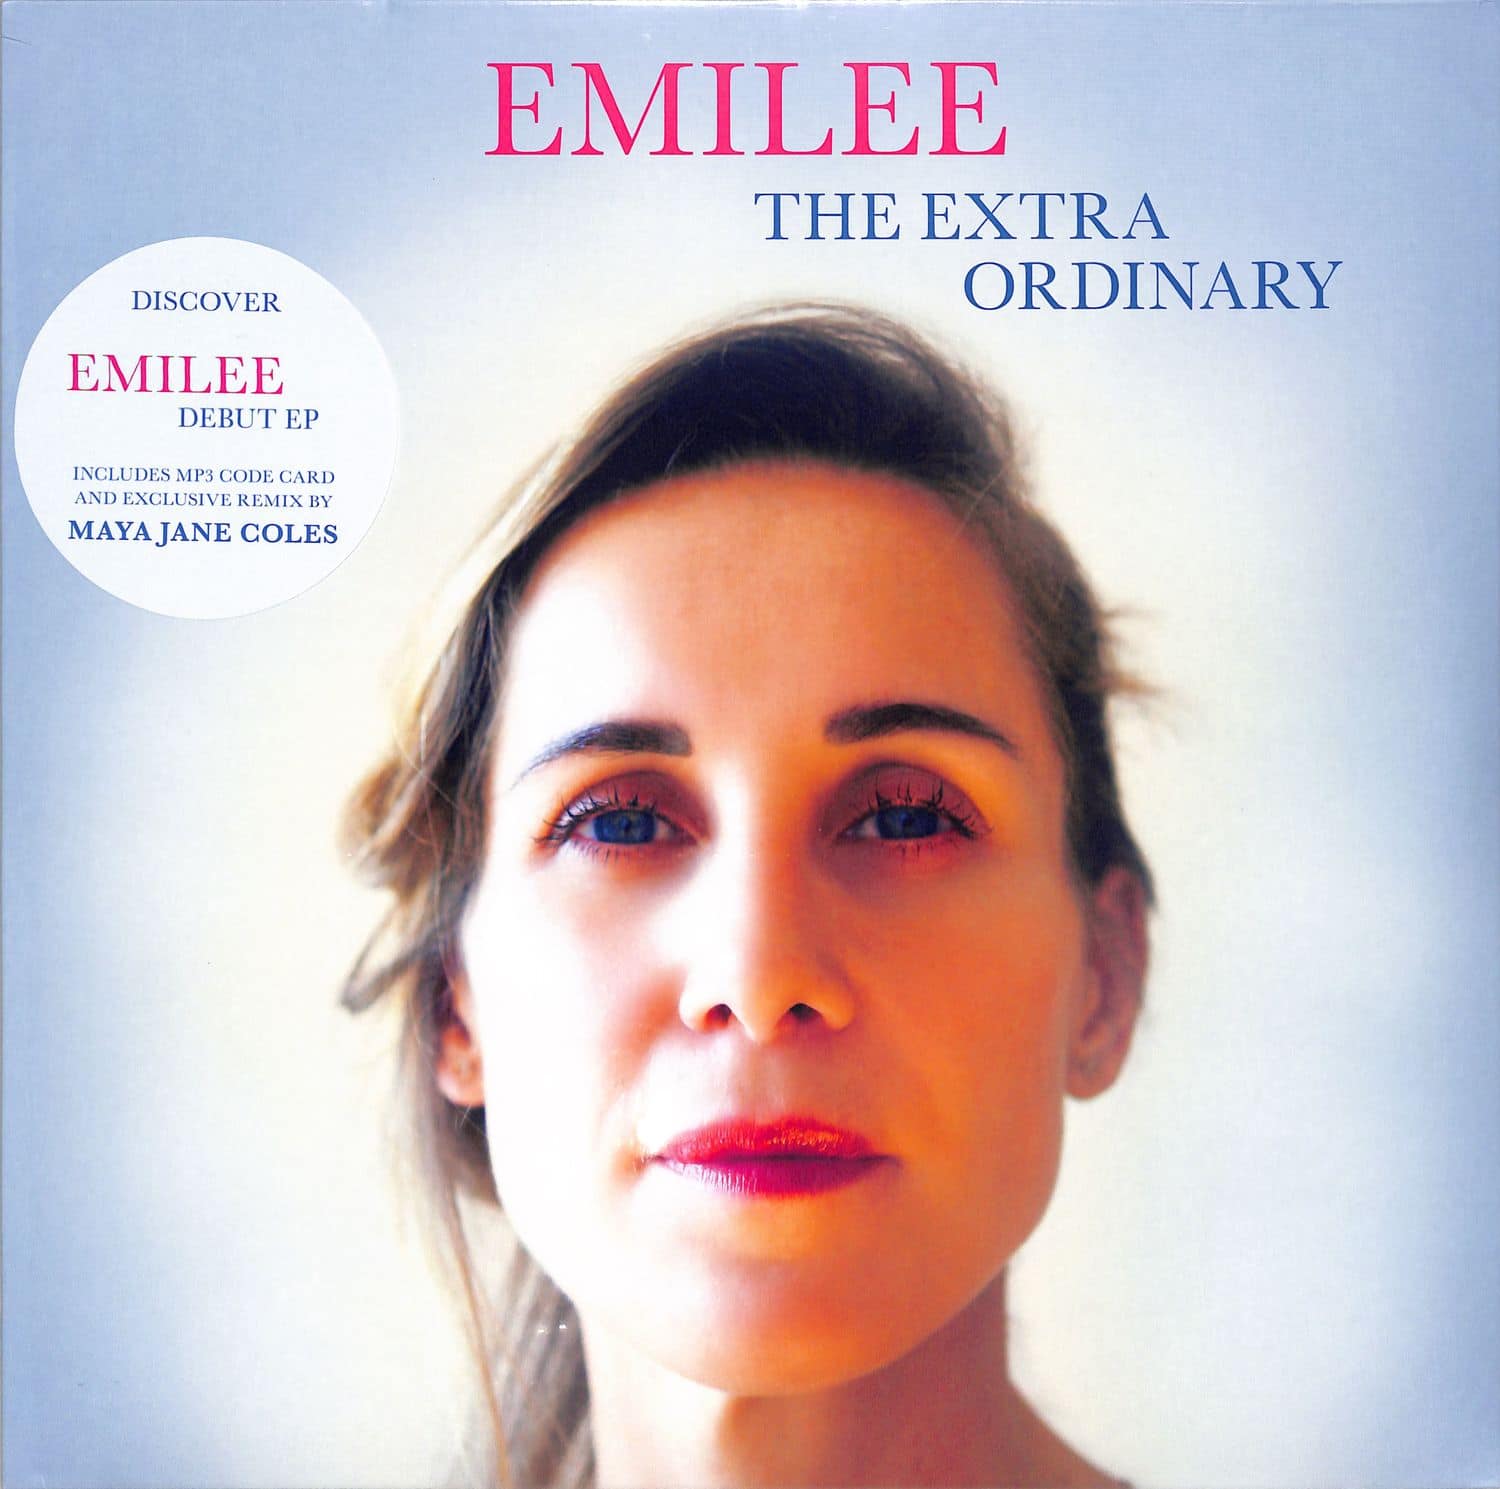 Emilee - THE EXTRA ORDINARY